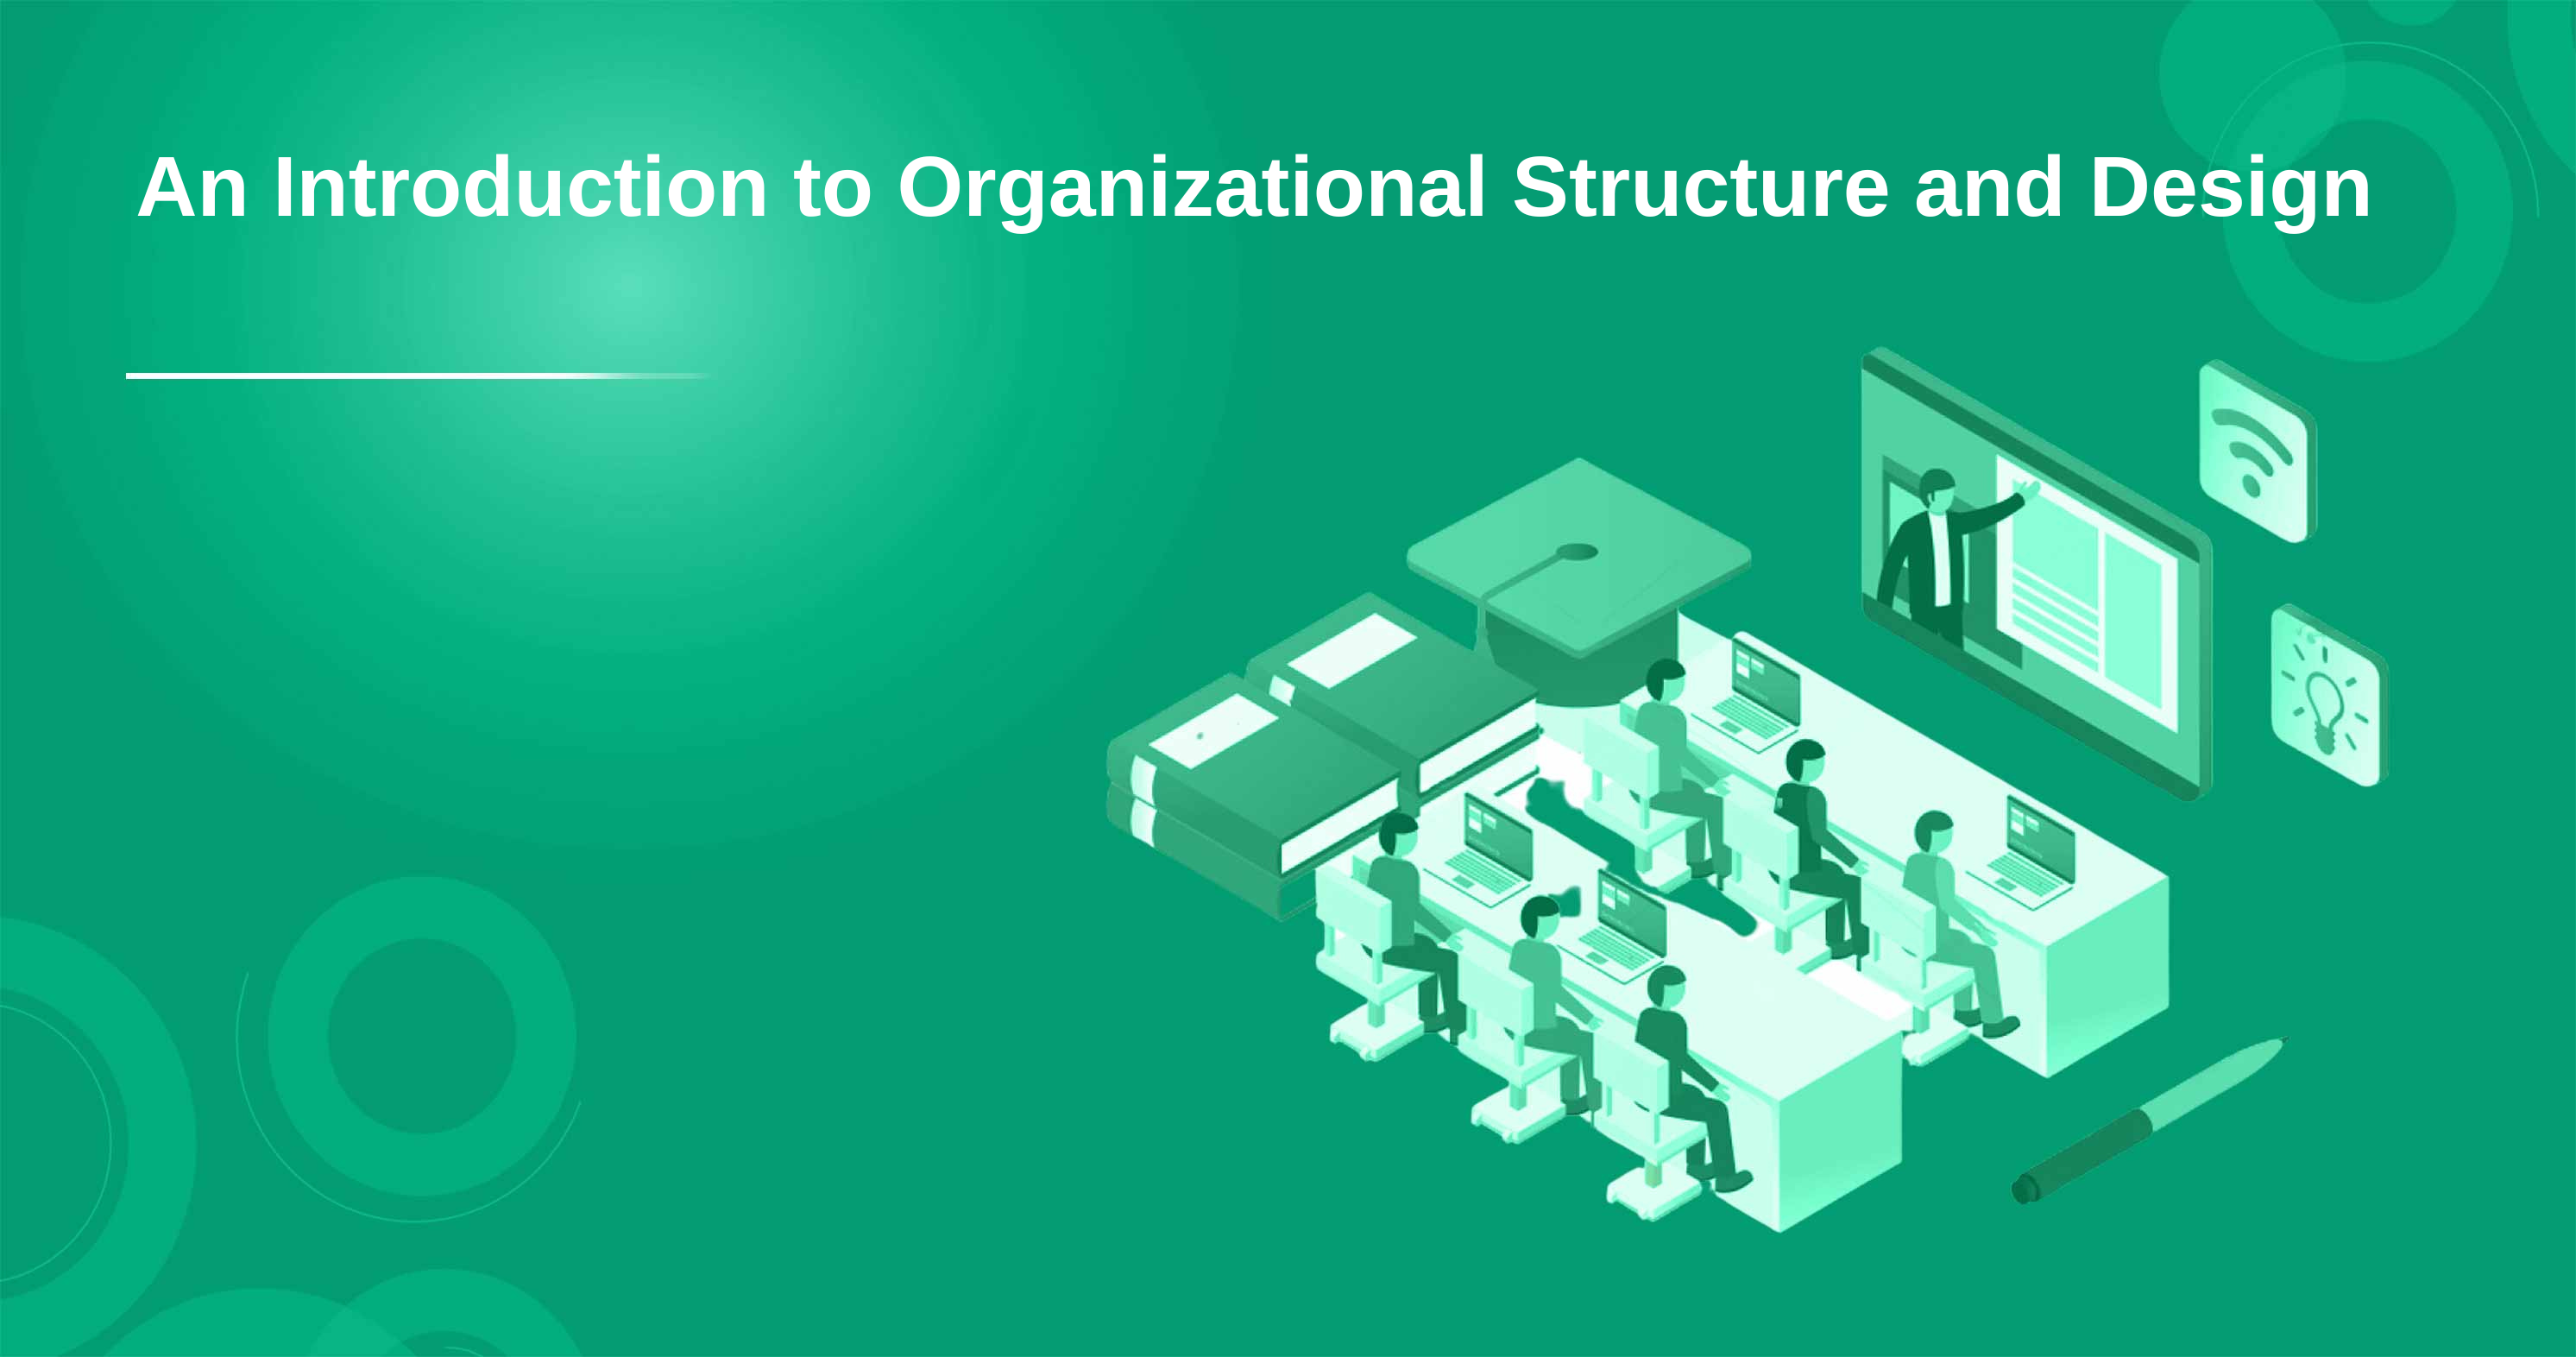 An Introduction to Organizational Structure and Design